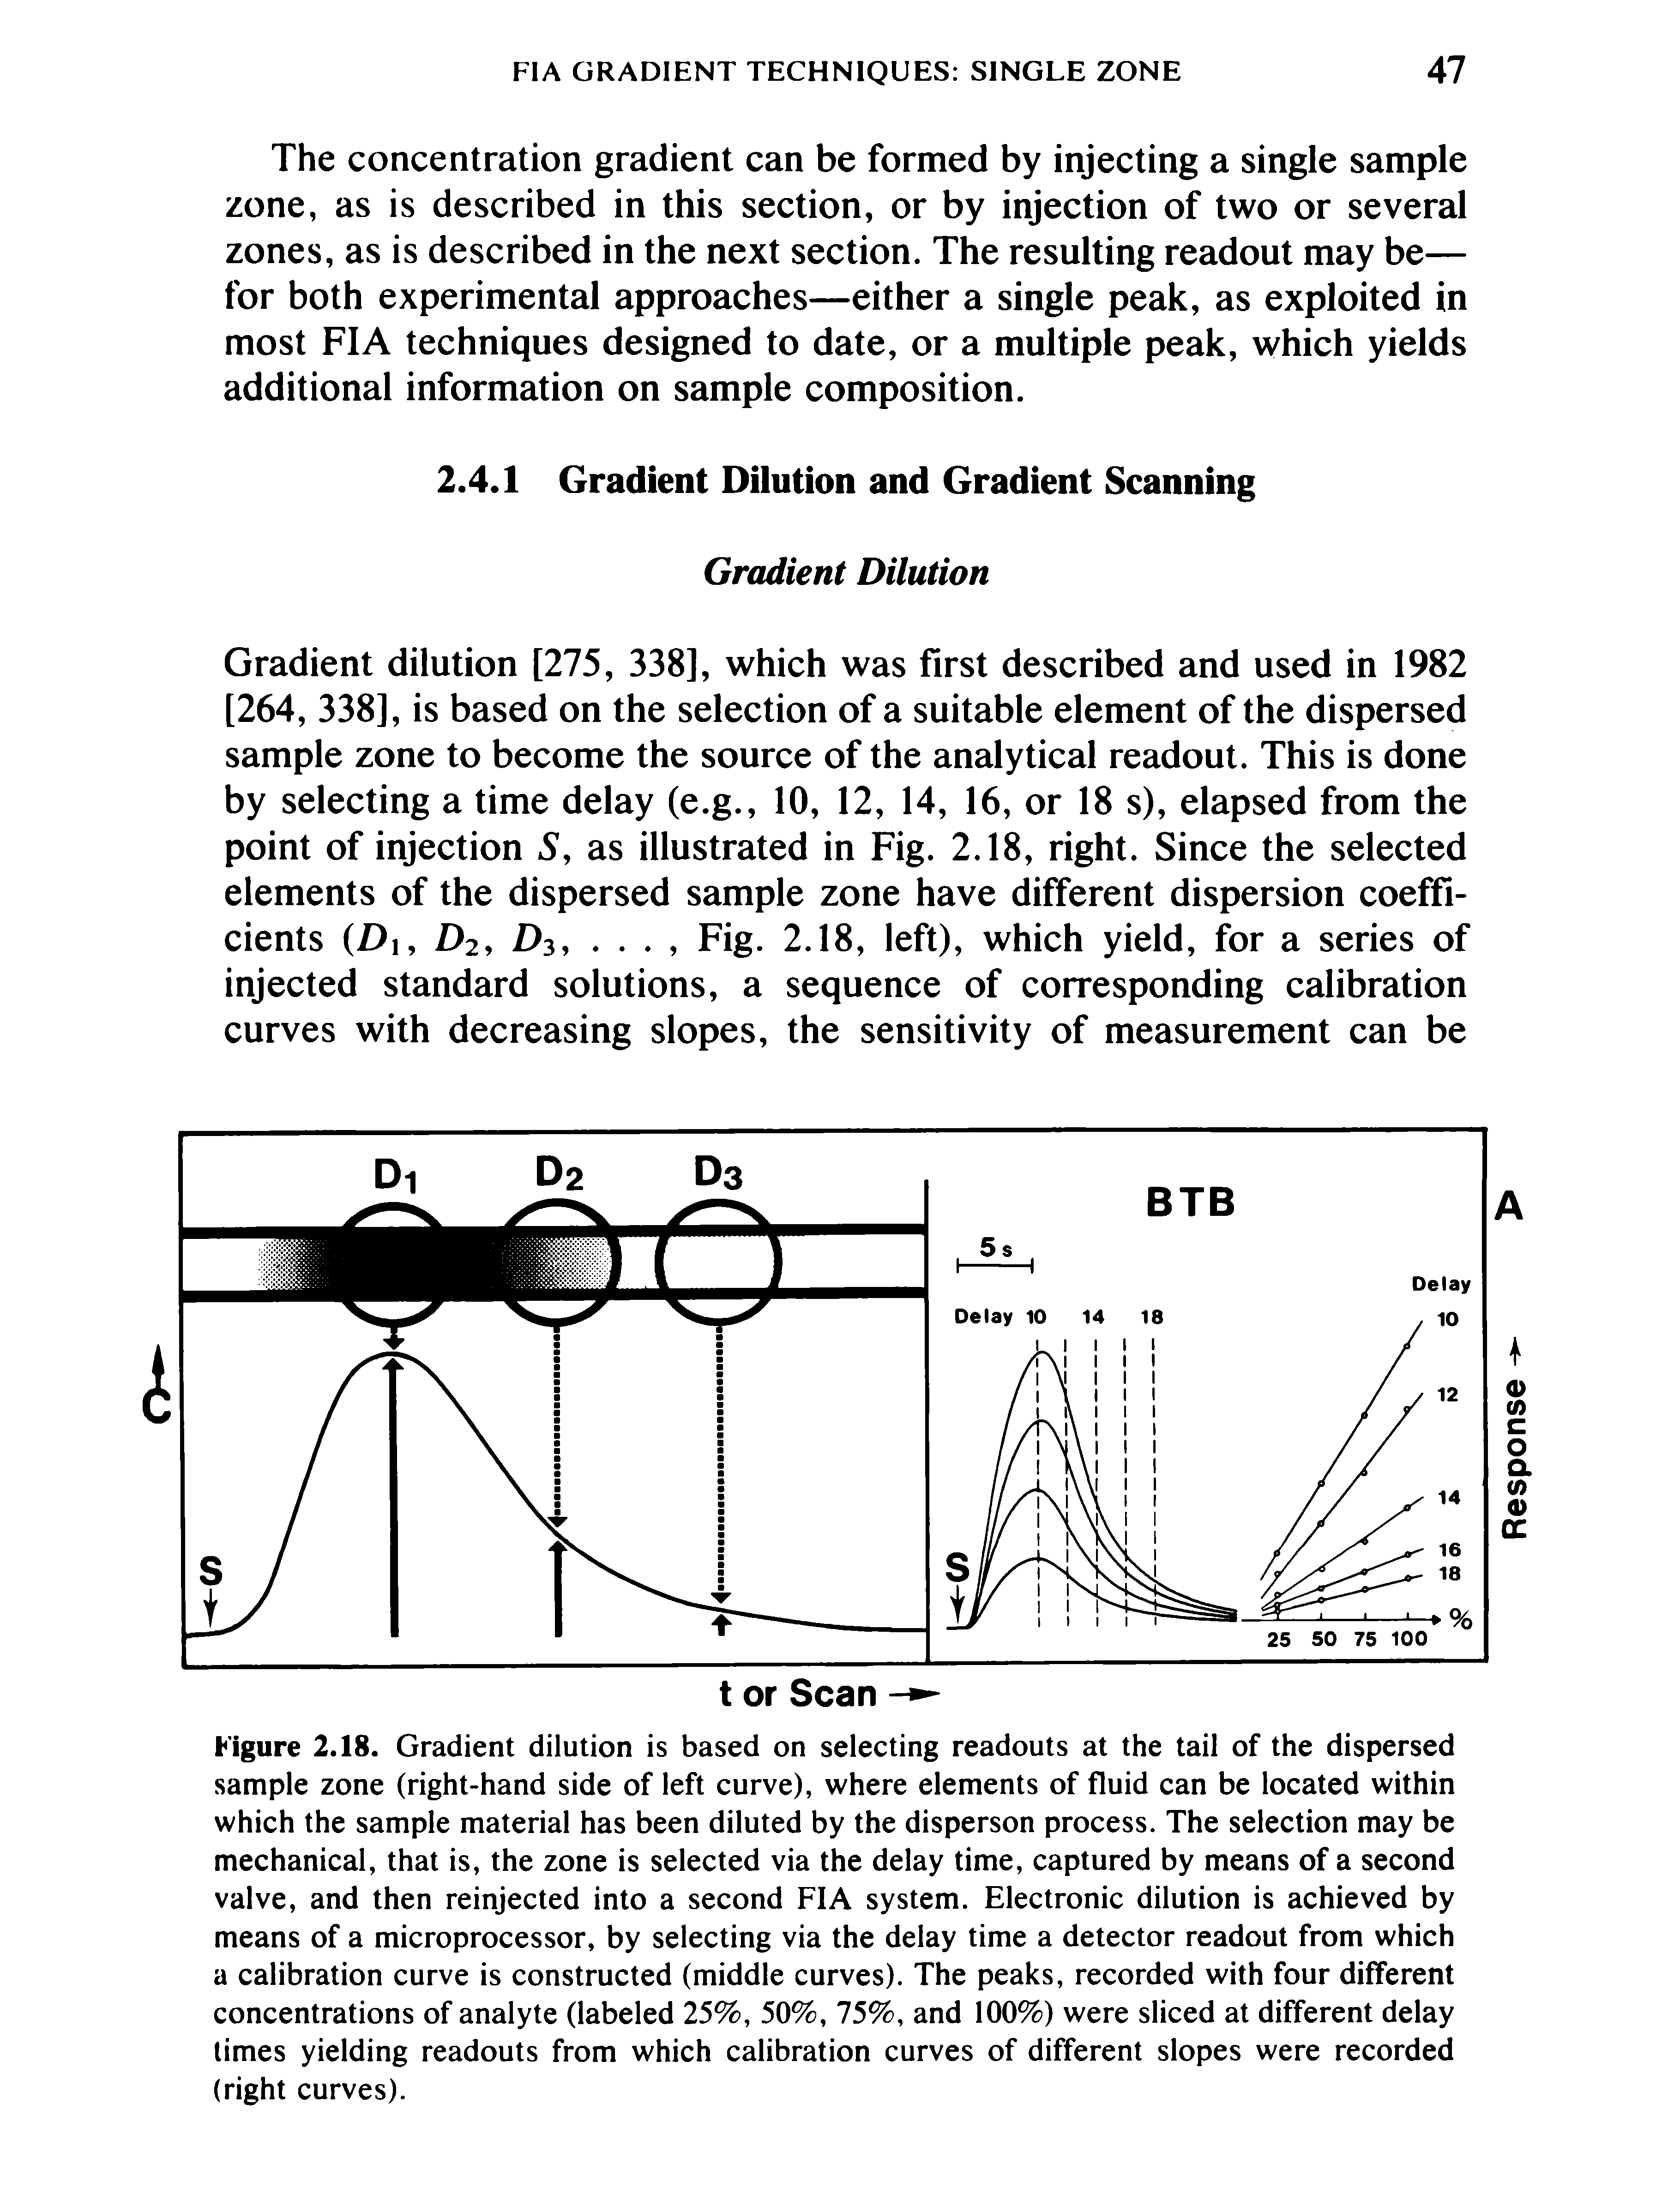 Figure 2.18. Gradient dilution is based on selecting readouts at the tail of the dispersed sample zone (right-hand side of left curve), where elements of fluid can be located within which the sample material has been diluted by the disperson process. The selection may be mechanical, that is, the zone is selected via the delay time, captured by means of a second valve, and then reinjected into a second FIA system. Electronic dilution is achieved by means of a microprocessor, by selecting via the delay time a detector readout from which a calibration curve is constructed (middle curves). The peaks, recorded with four different concentrations of analyte (labeled 25%, 50%, 75%, and 100%) were sliced at different delay limes yielding readouts from which calibration curves of different slopes were recorded (right curves).